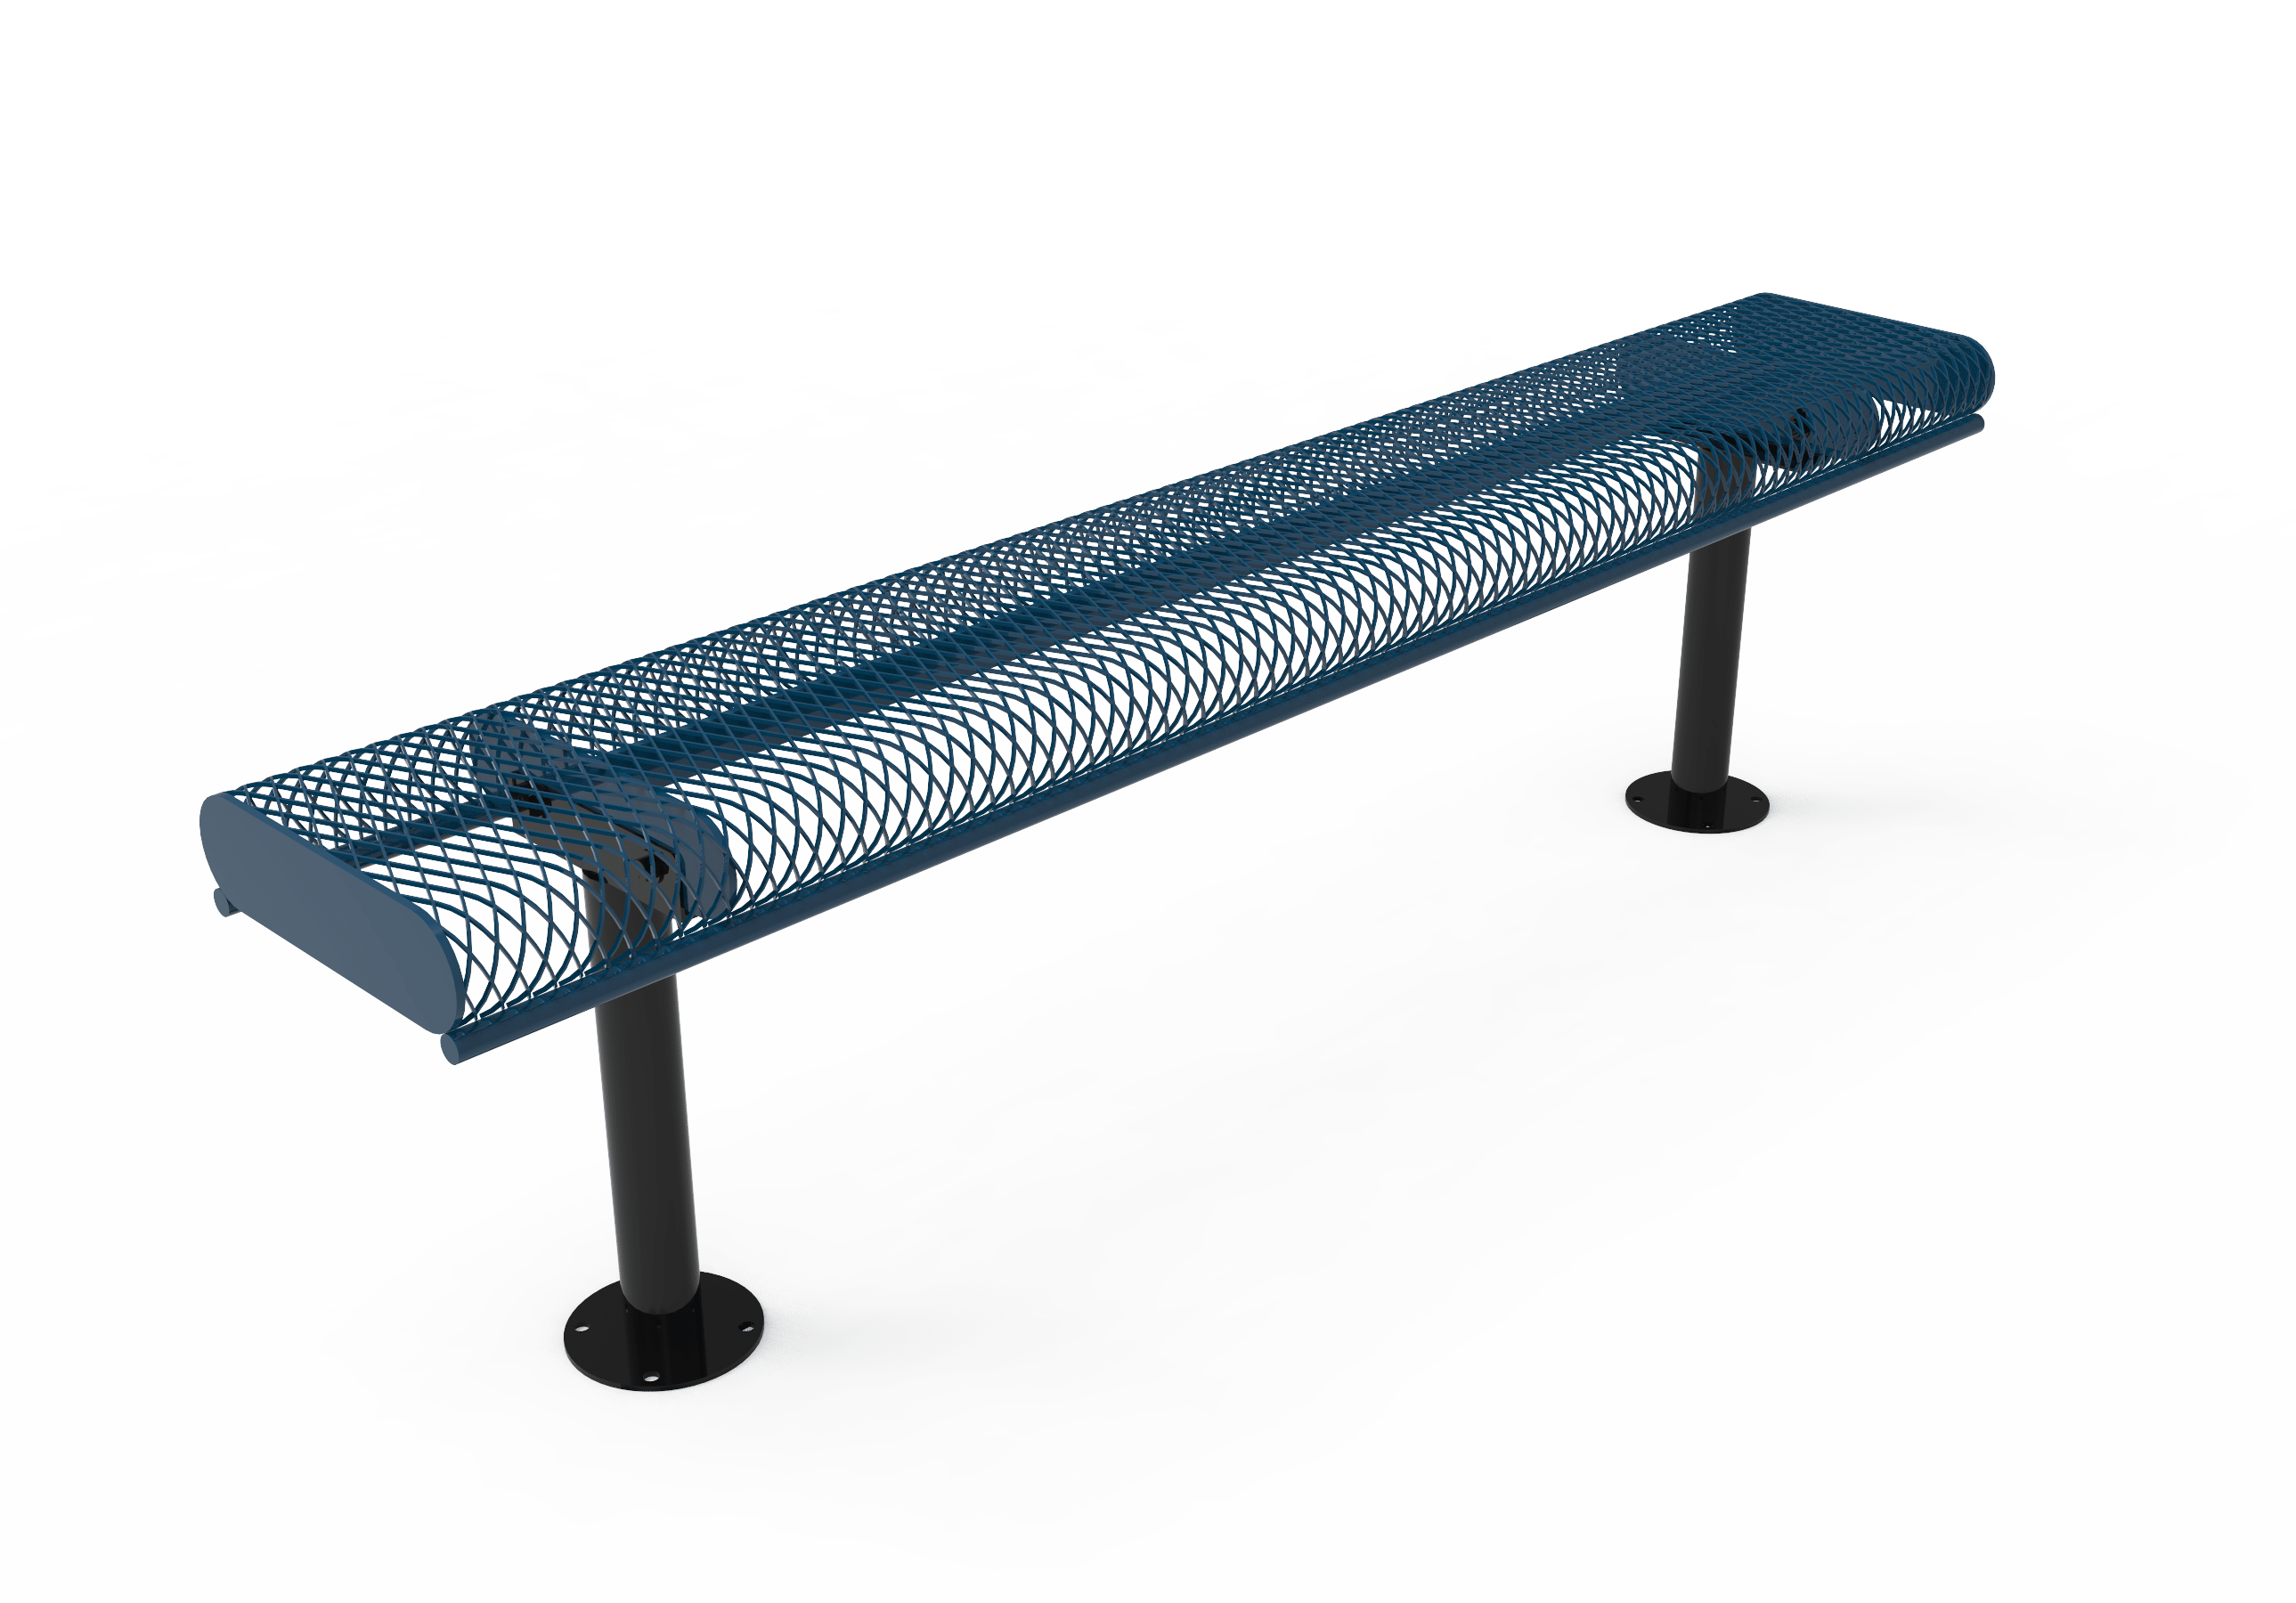 4′ Rolled Bench Without Back-Mesh
BRE04-C-23-000
Industry Standard Finish
$389.00
BRE04-A-23-000
Advantage Premium Finish
$469.00
